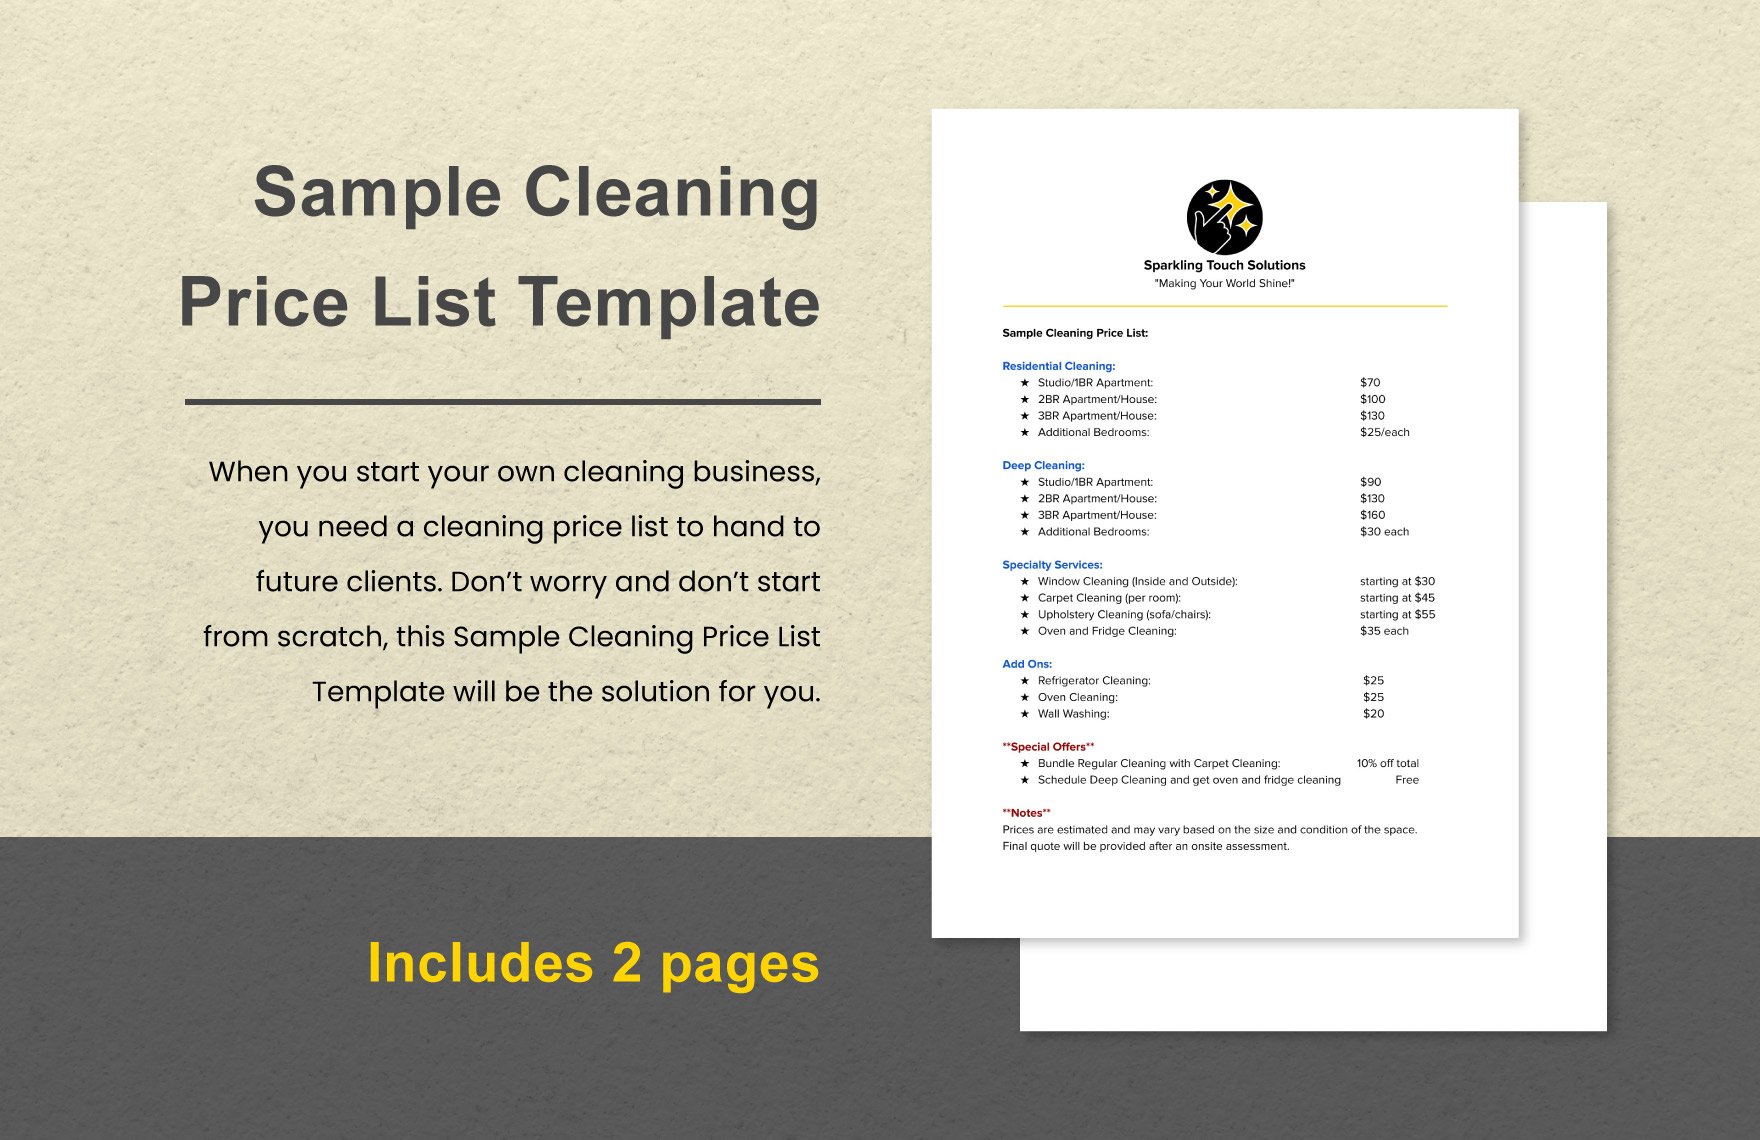 Sample Cleaning Price List Template